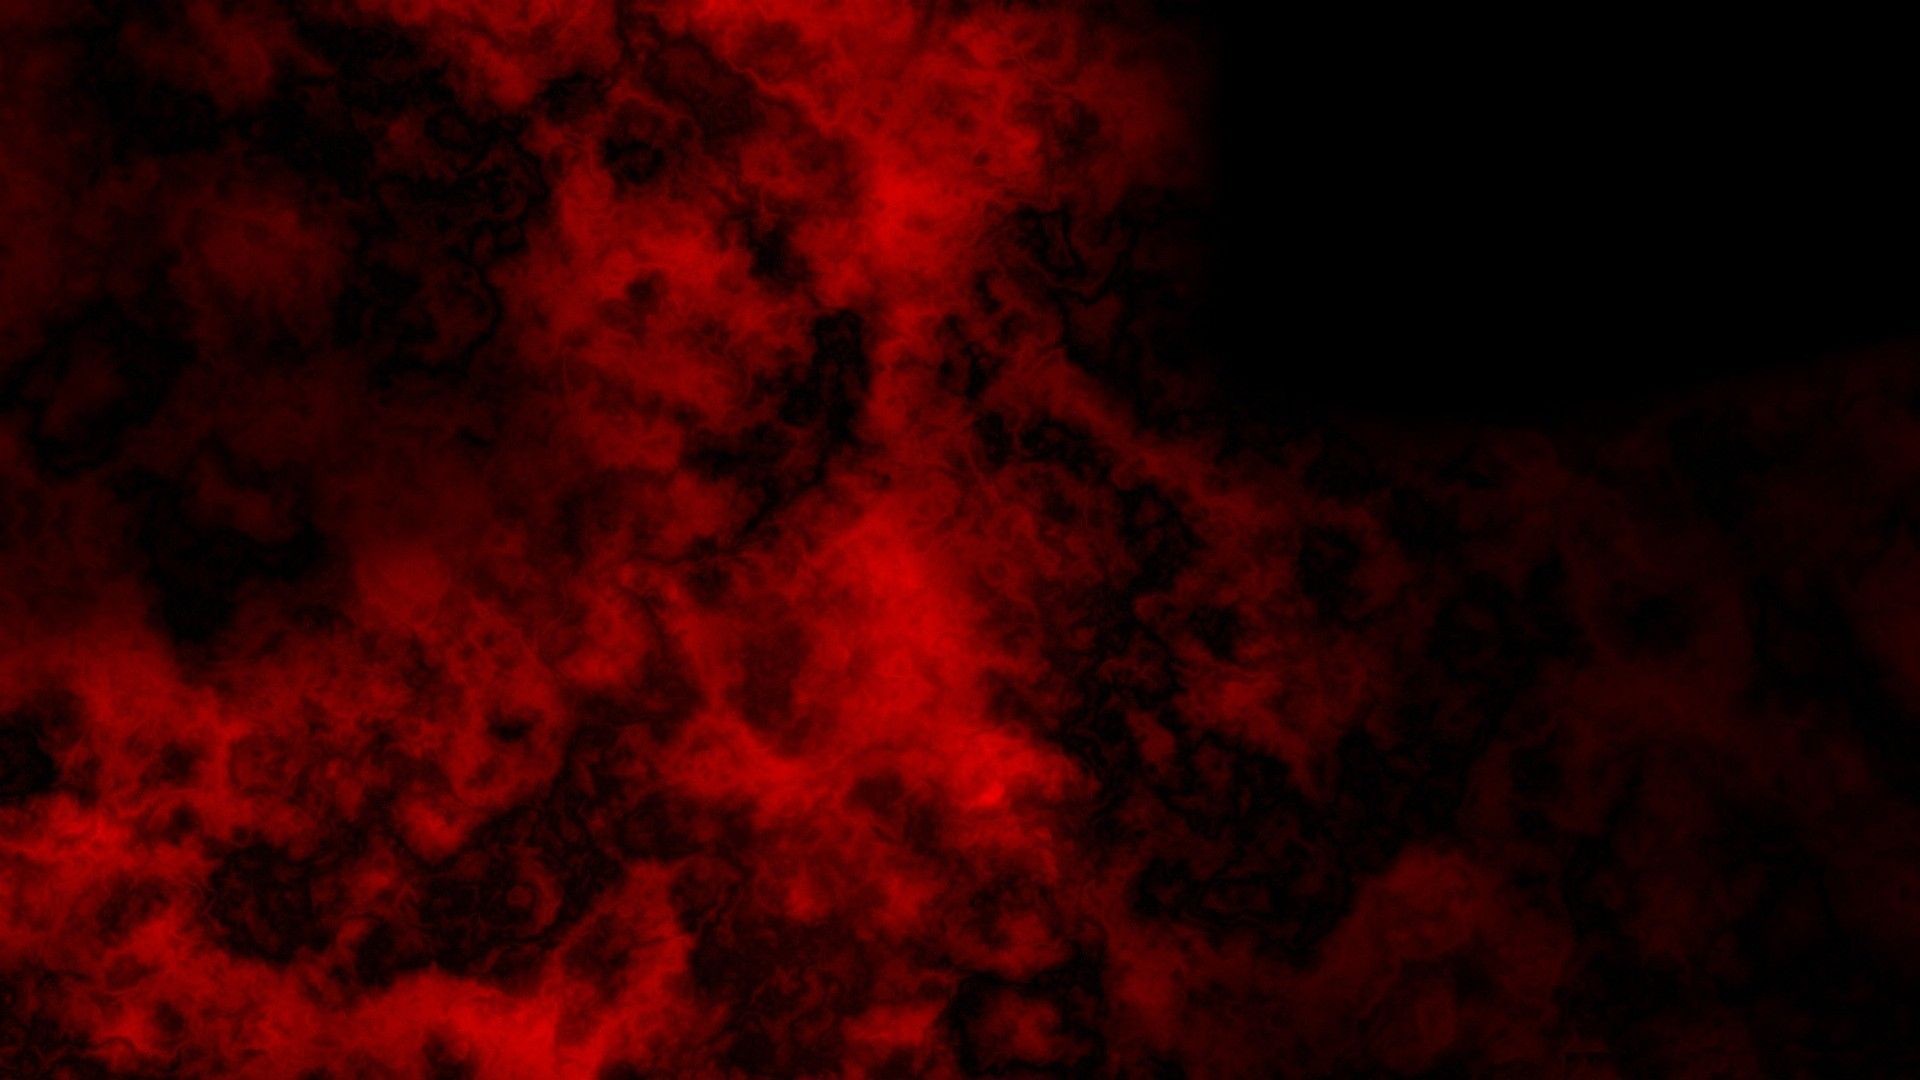 Smoky blood, bloody background powerpoint wallpapers 